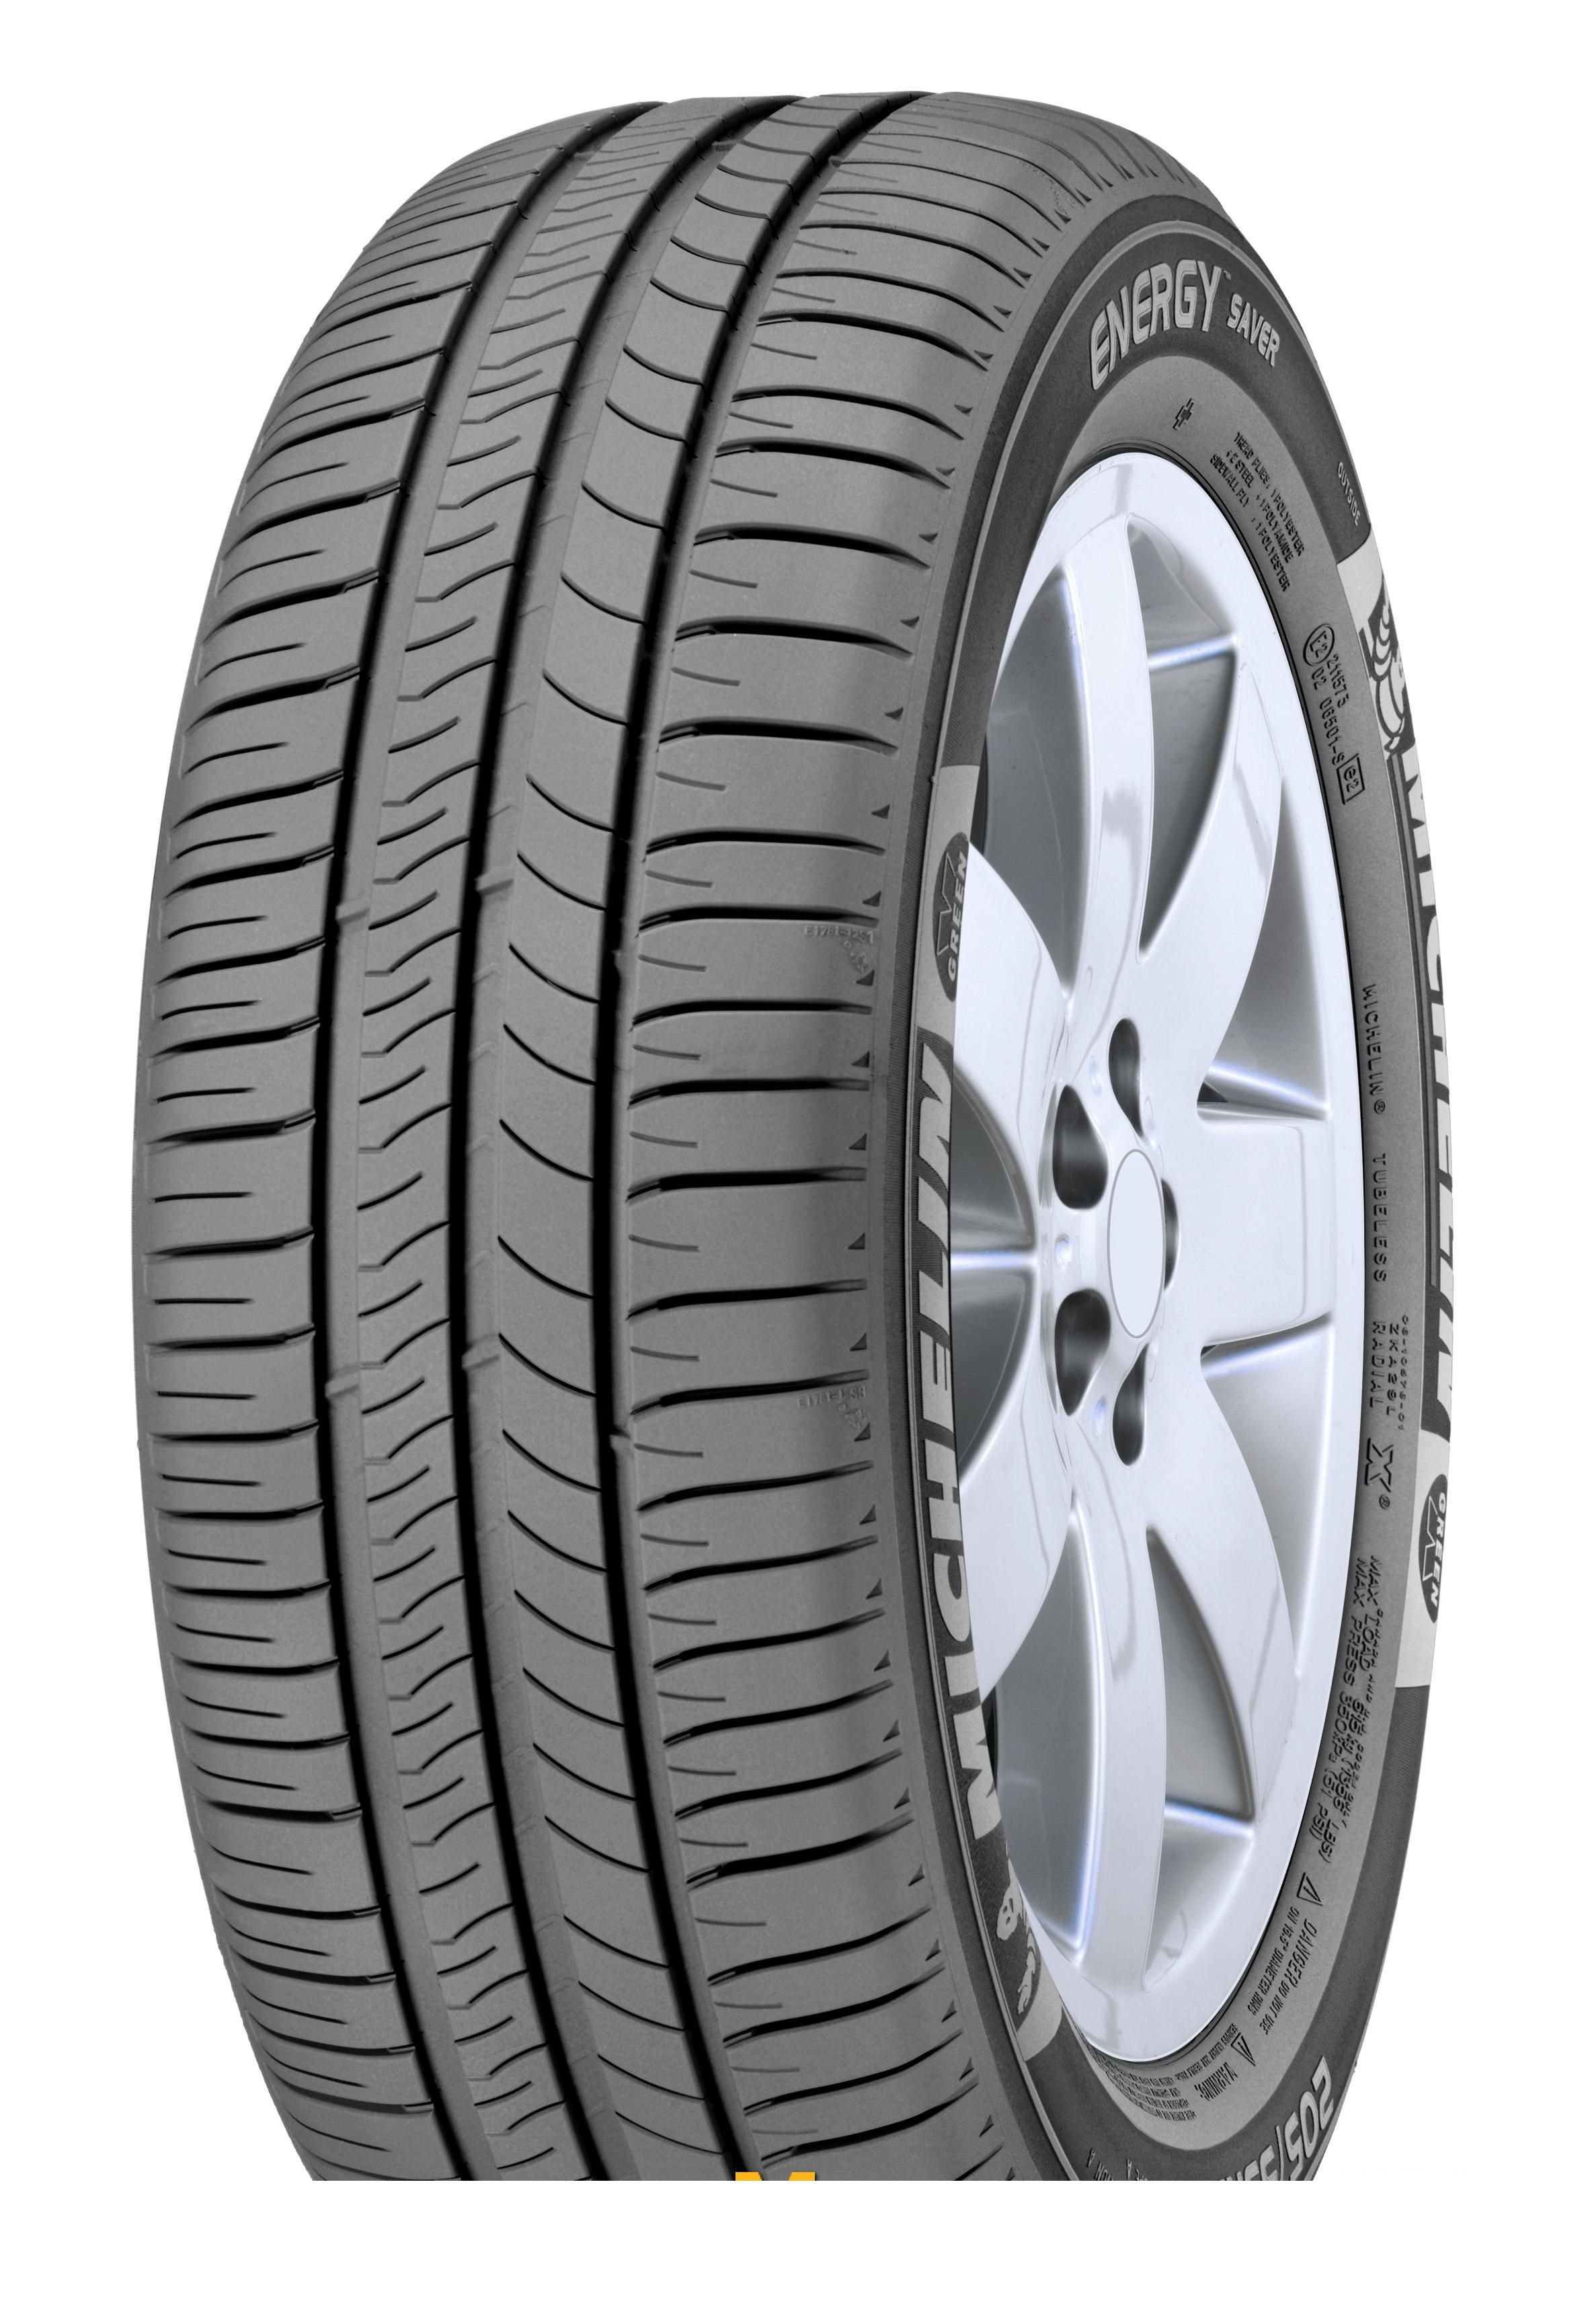 Tire Michelin Energy Saver+ 205/60R16 96V - picture, photo, image